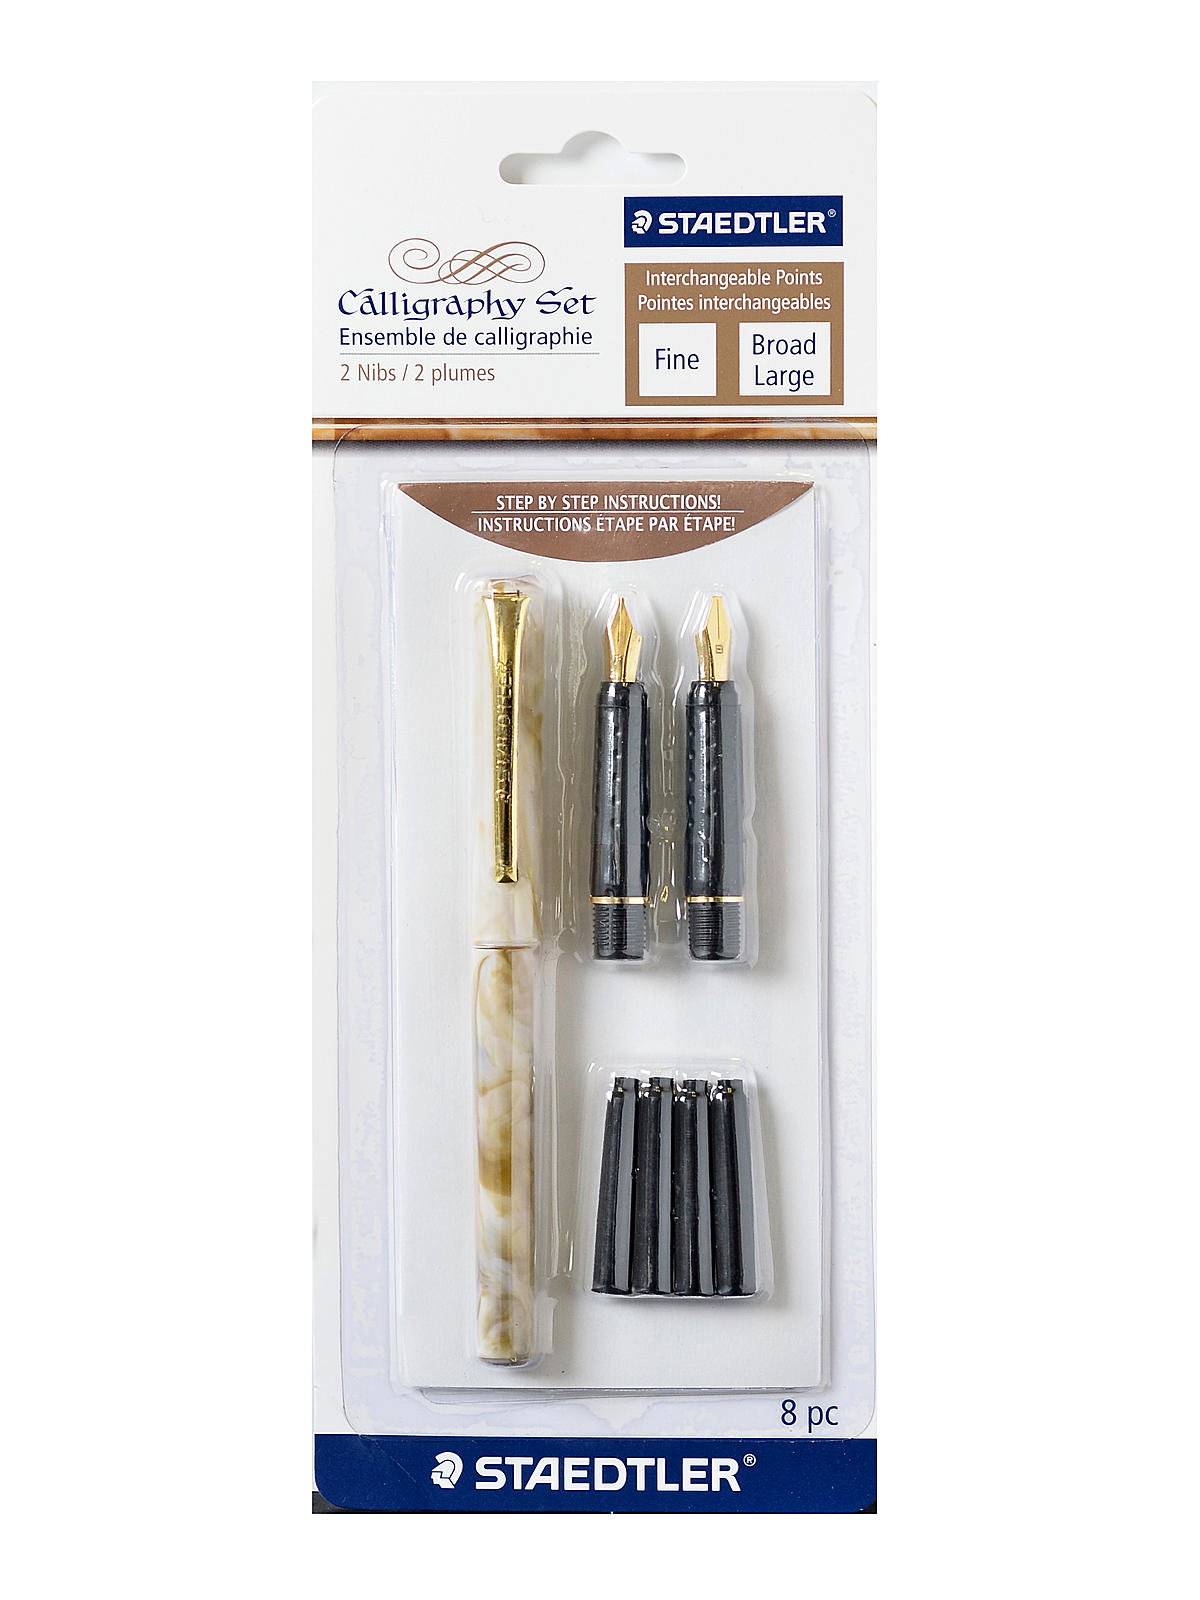 Staedtler Metallic Calligraphy Markers - 5 / Pack - STD8325TB5A6